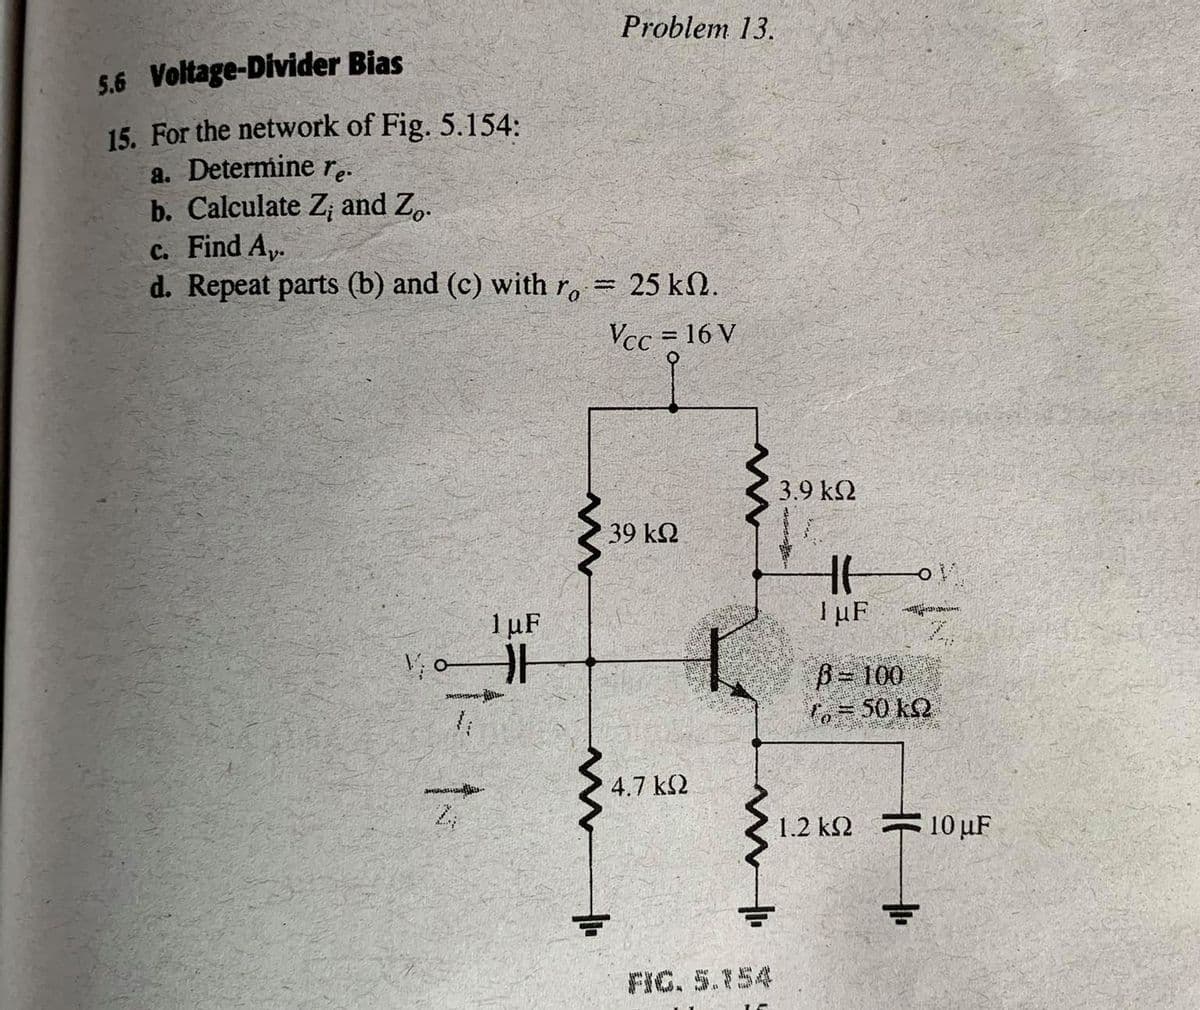 Problem 13.
5.6 Voltage-Divider Bias
15. For the network of Fig. 5.154:
a. Determine r.
b. Calculate Z and Z.
c. Find A,.
d. Repeat parts (b) and (c) with r, = 25 kN.
Vcc = 16 V
3.9 k2
39 k2
I uF
1µF
Z.
V; oH
B 100
fo=50 k2
4.7 k2
1.2 k2
10 uF
FIG. 5.154
